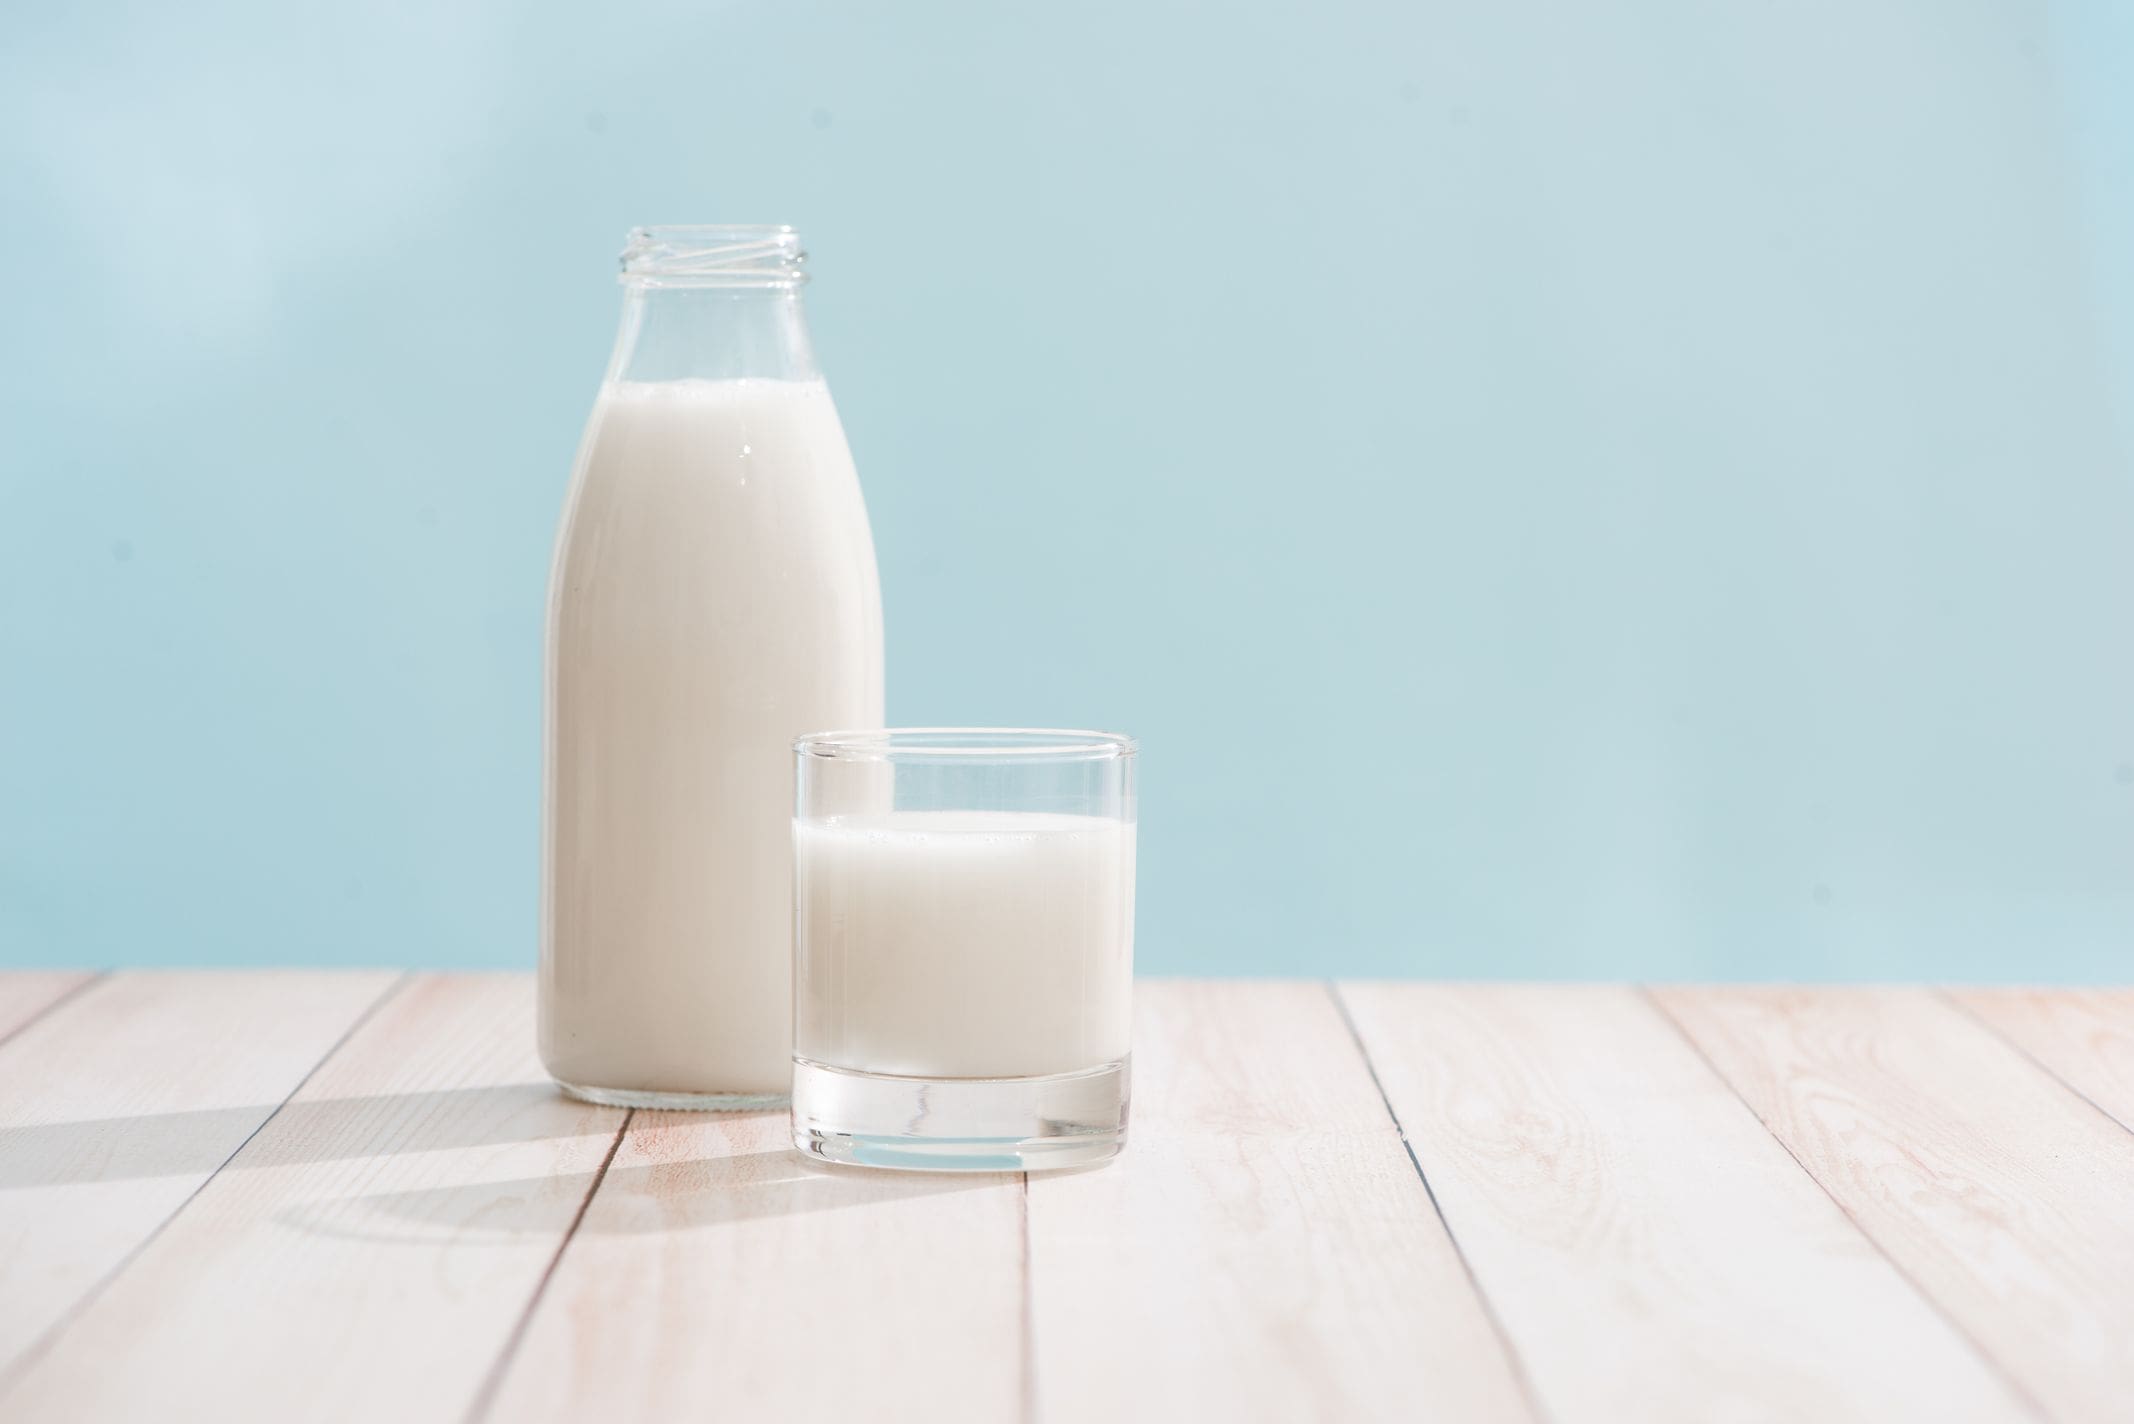 Is there a link between dairy food and chronic kidney disease?